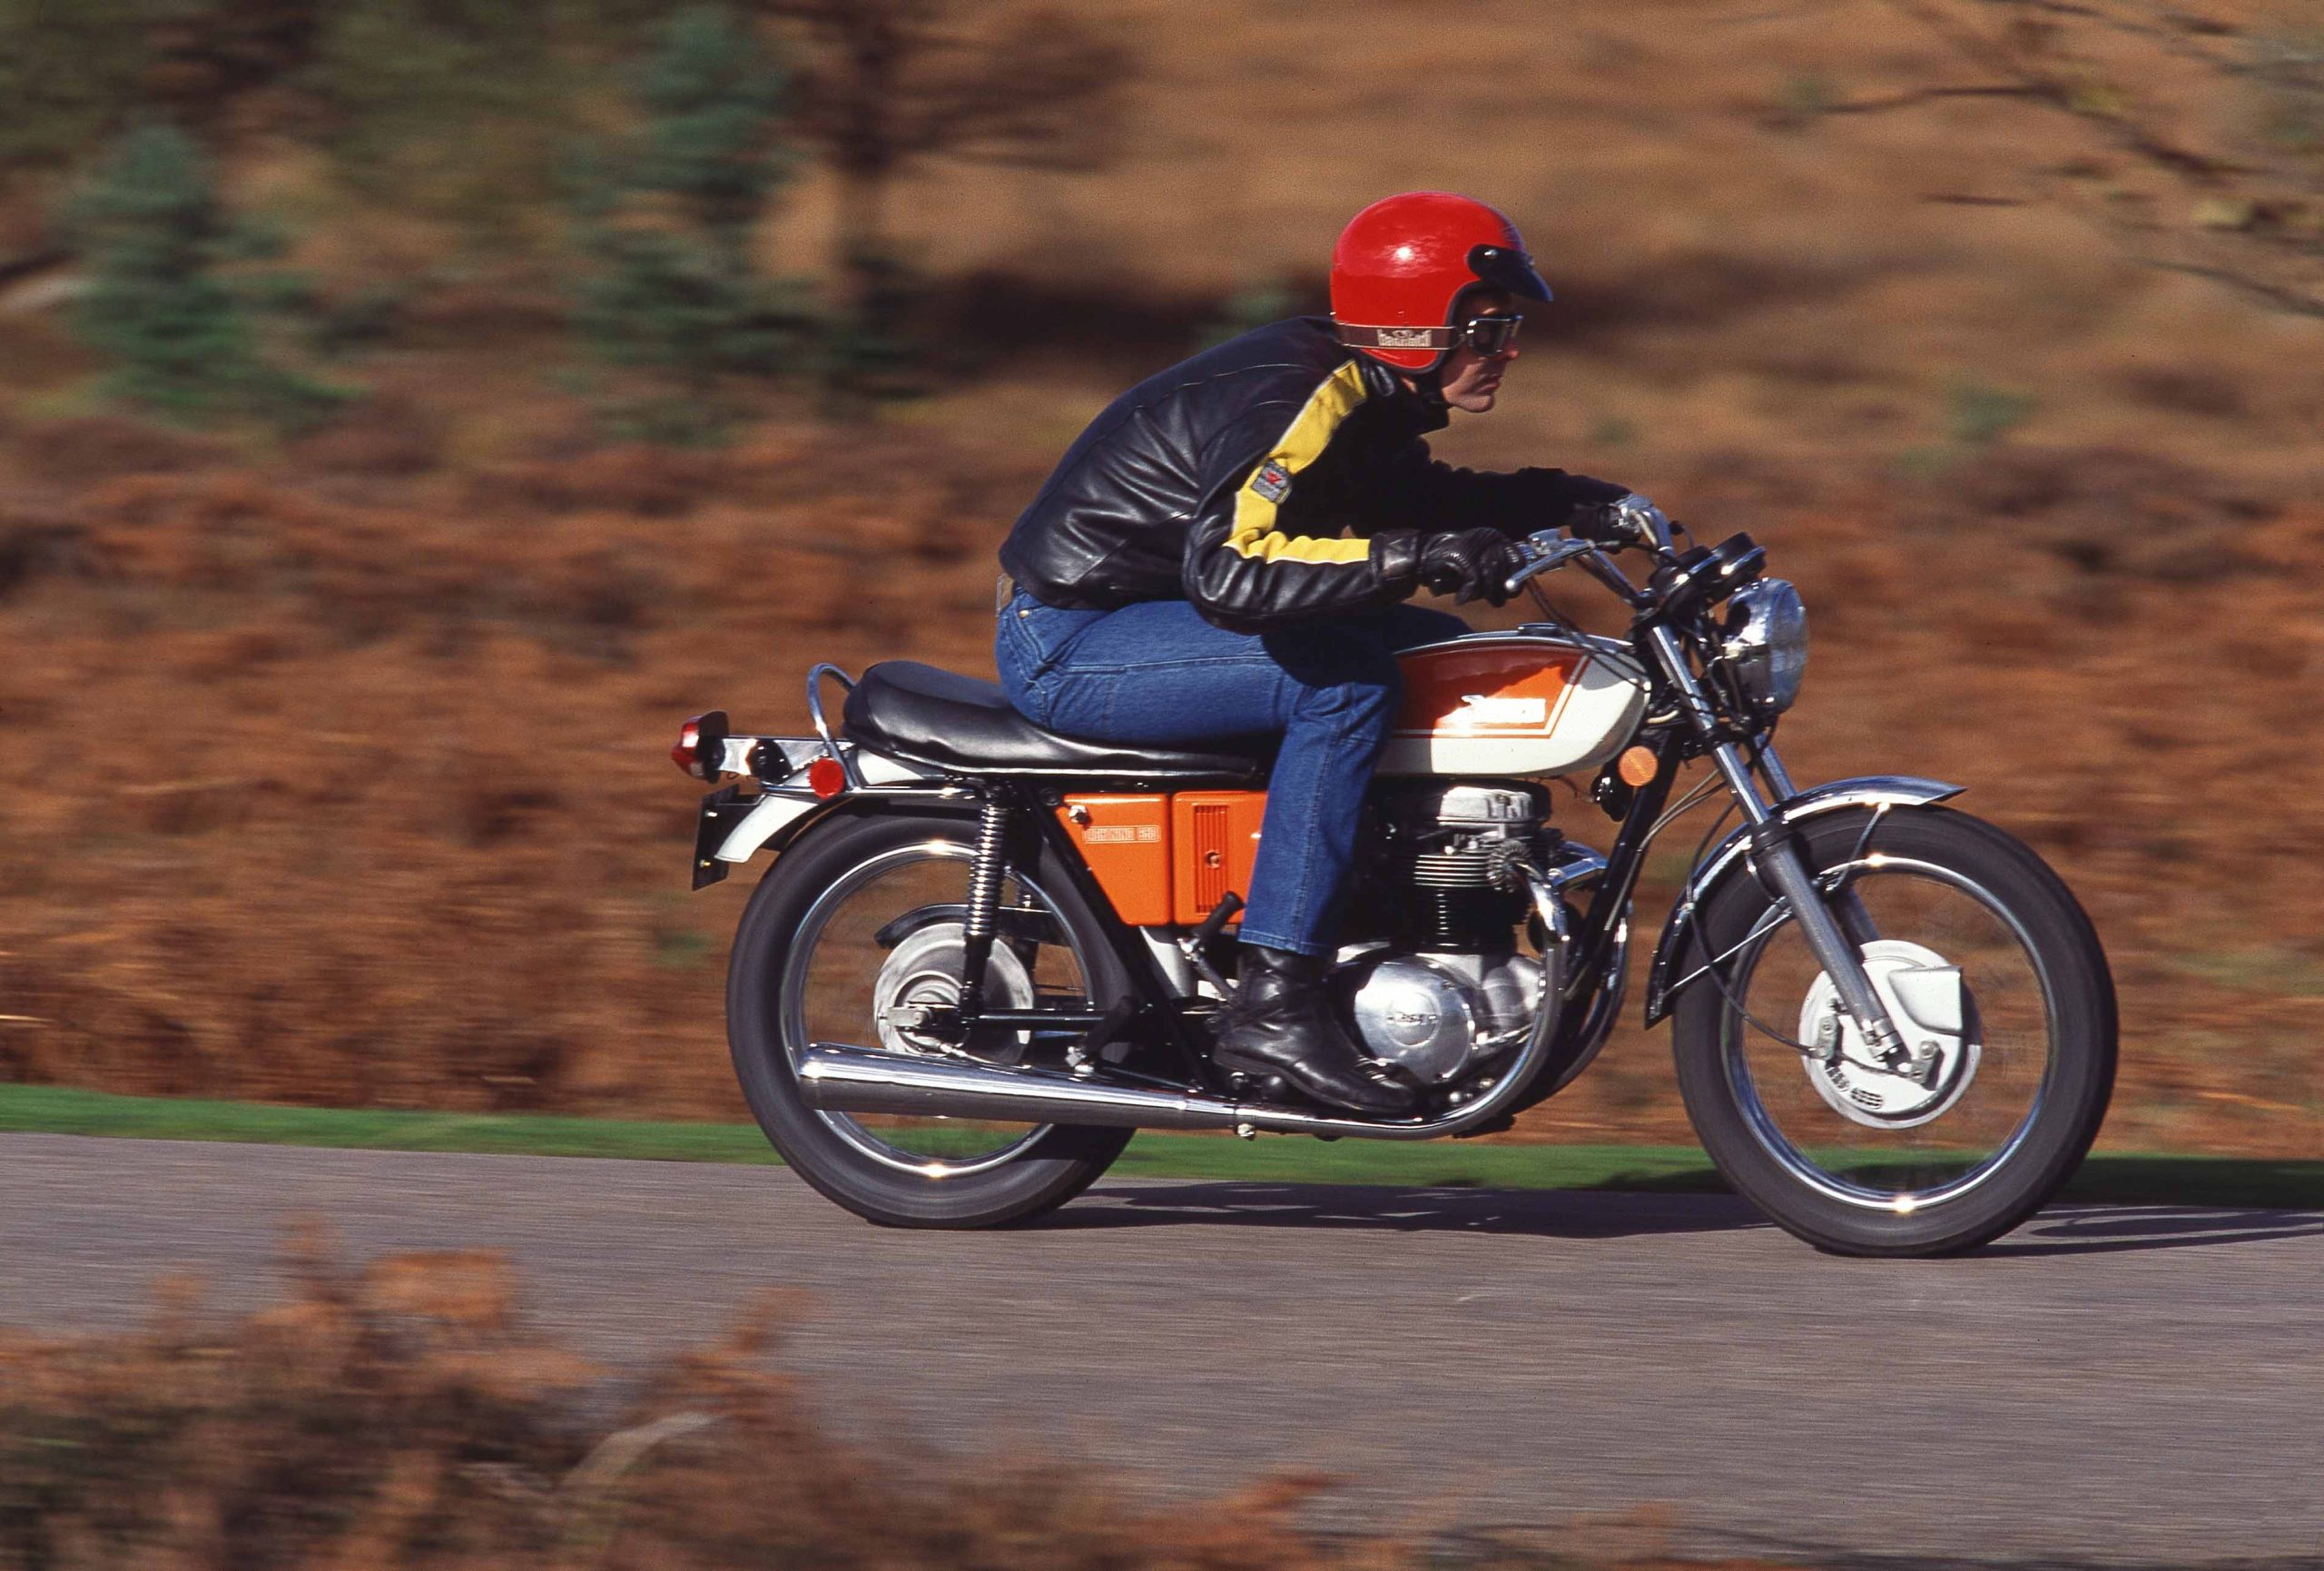 The 650 Lightning was good – but not good enough to save BSA